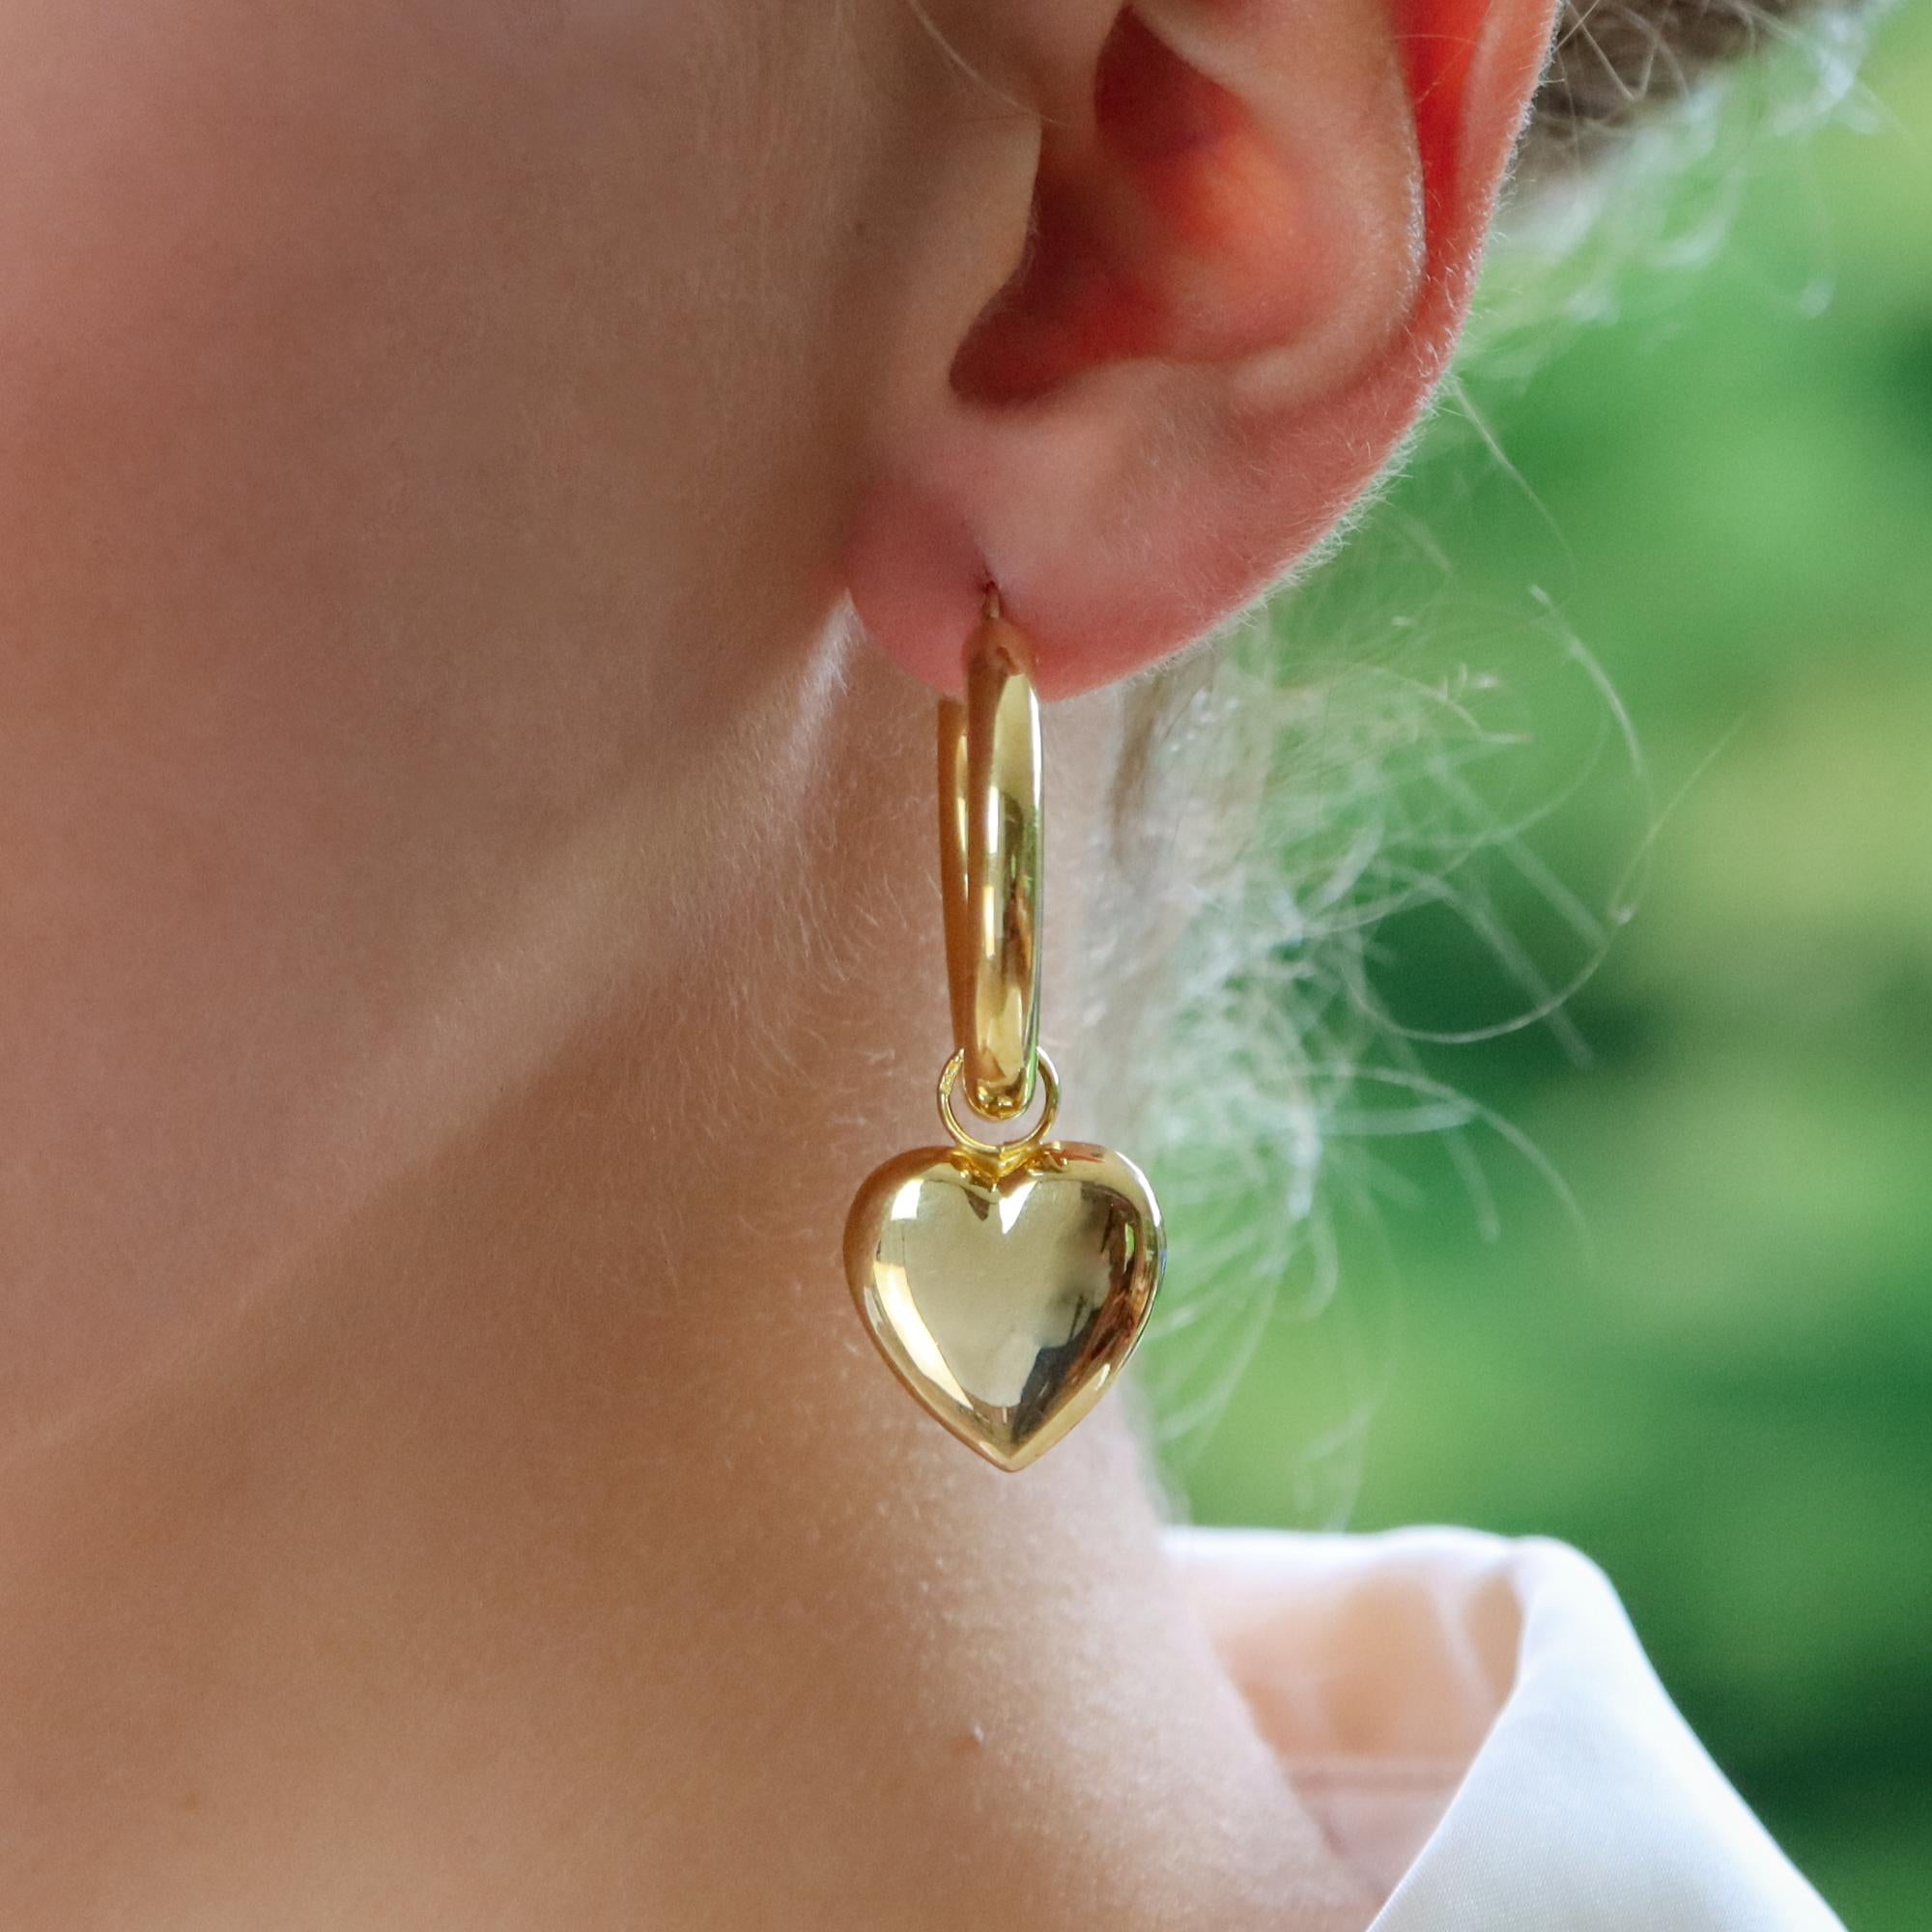 Vintage Retro Convertible Heart Drop Hoop Earrings in 9k Yellow Gold In Excellent Condition For Sale In London, GB